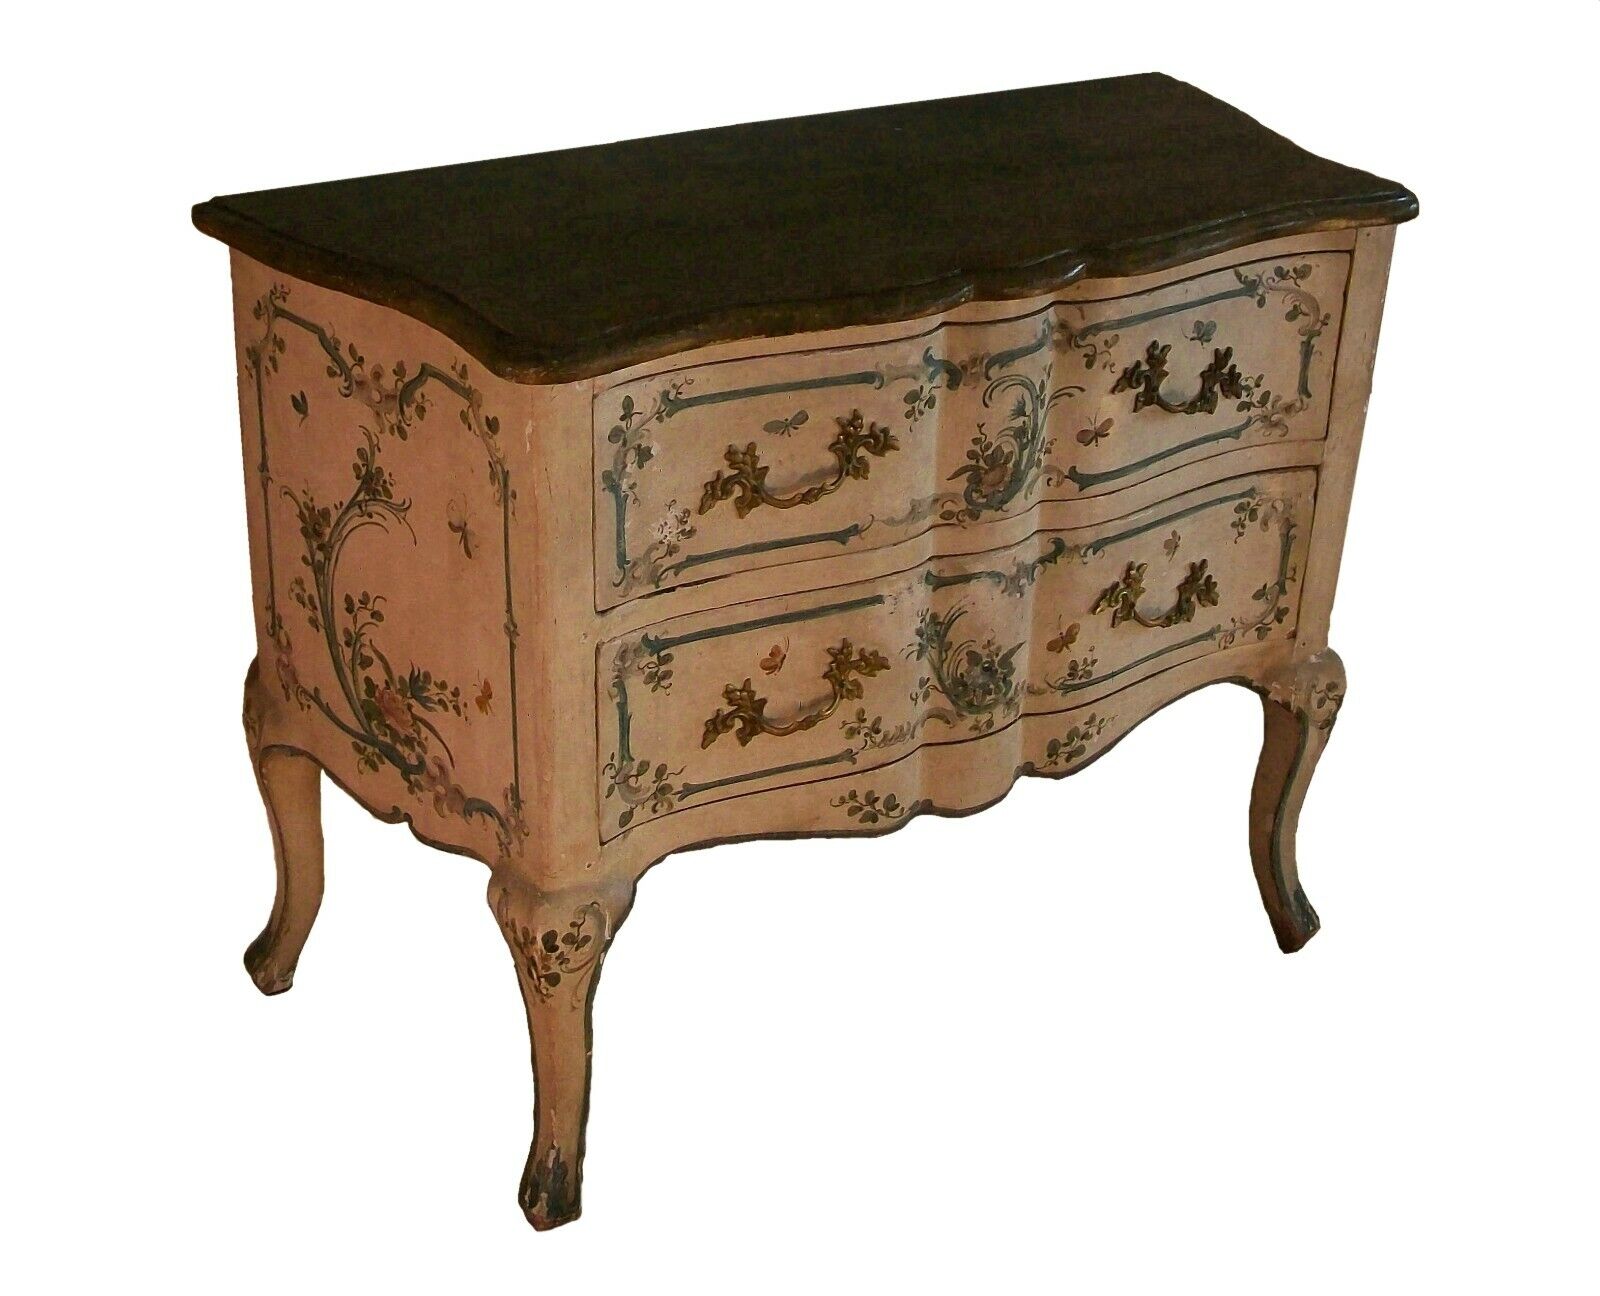 Italian Rococo Floral & Butterfly Painted Chest of Drawers - Mid 19th Century